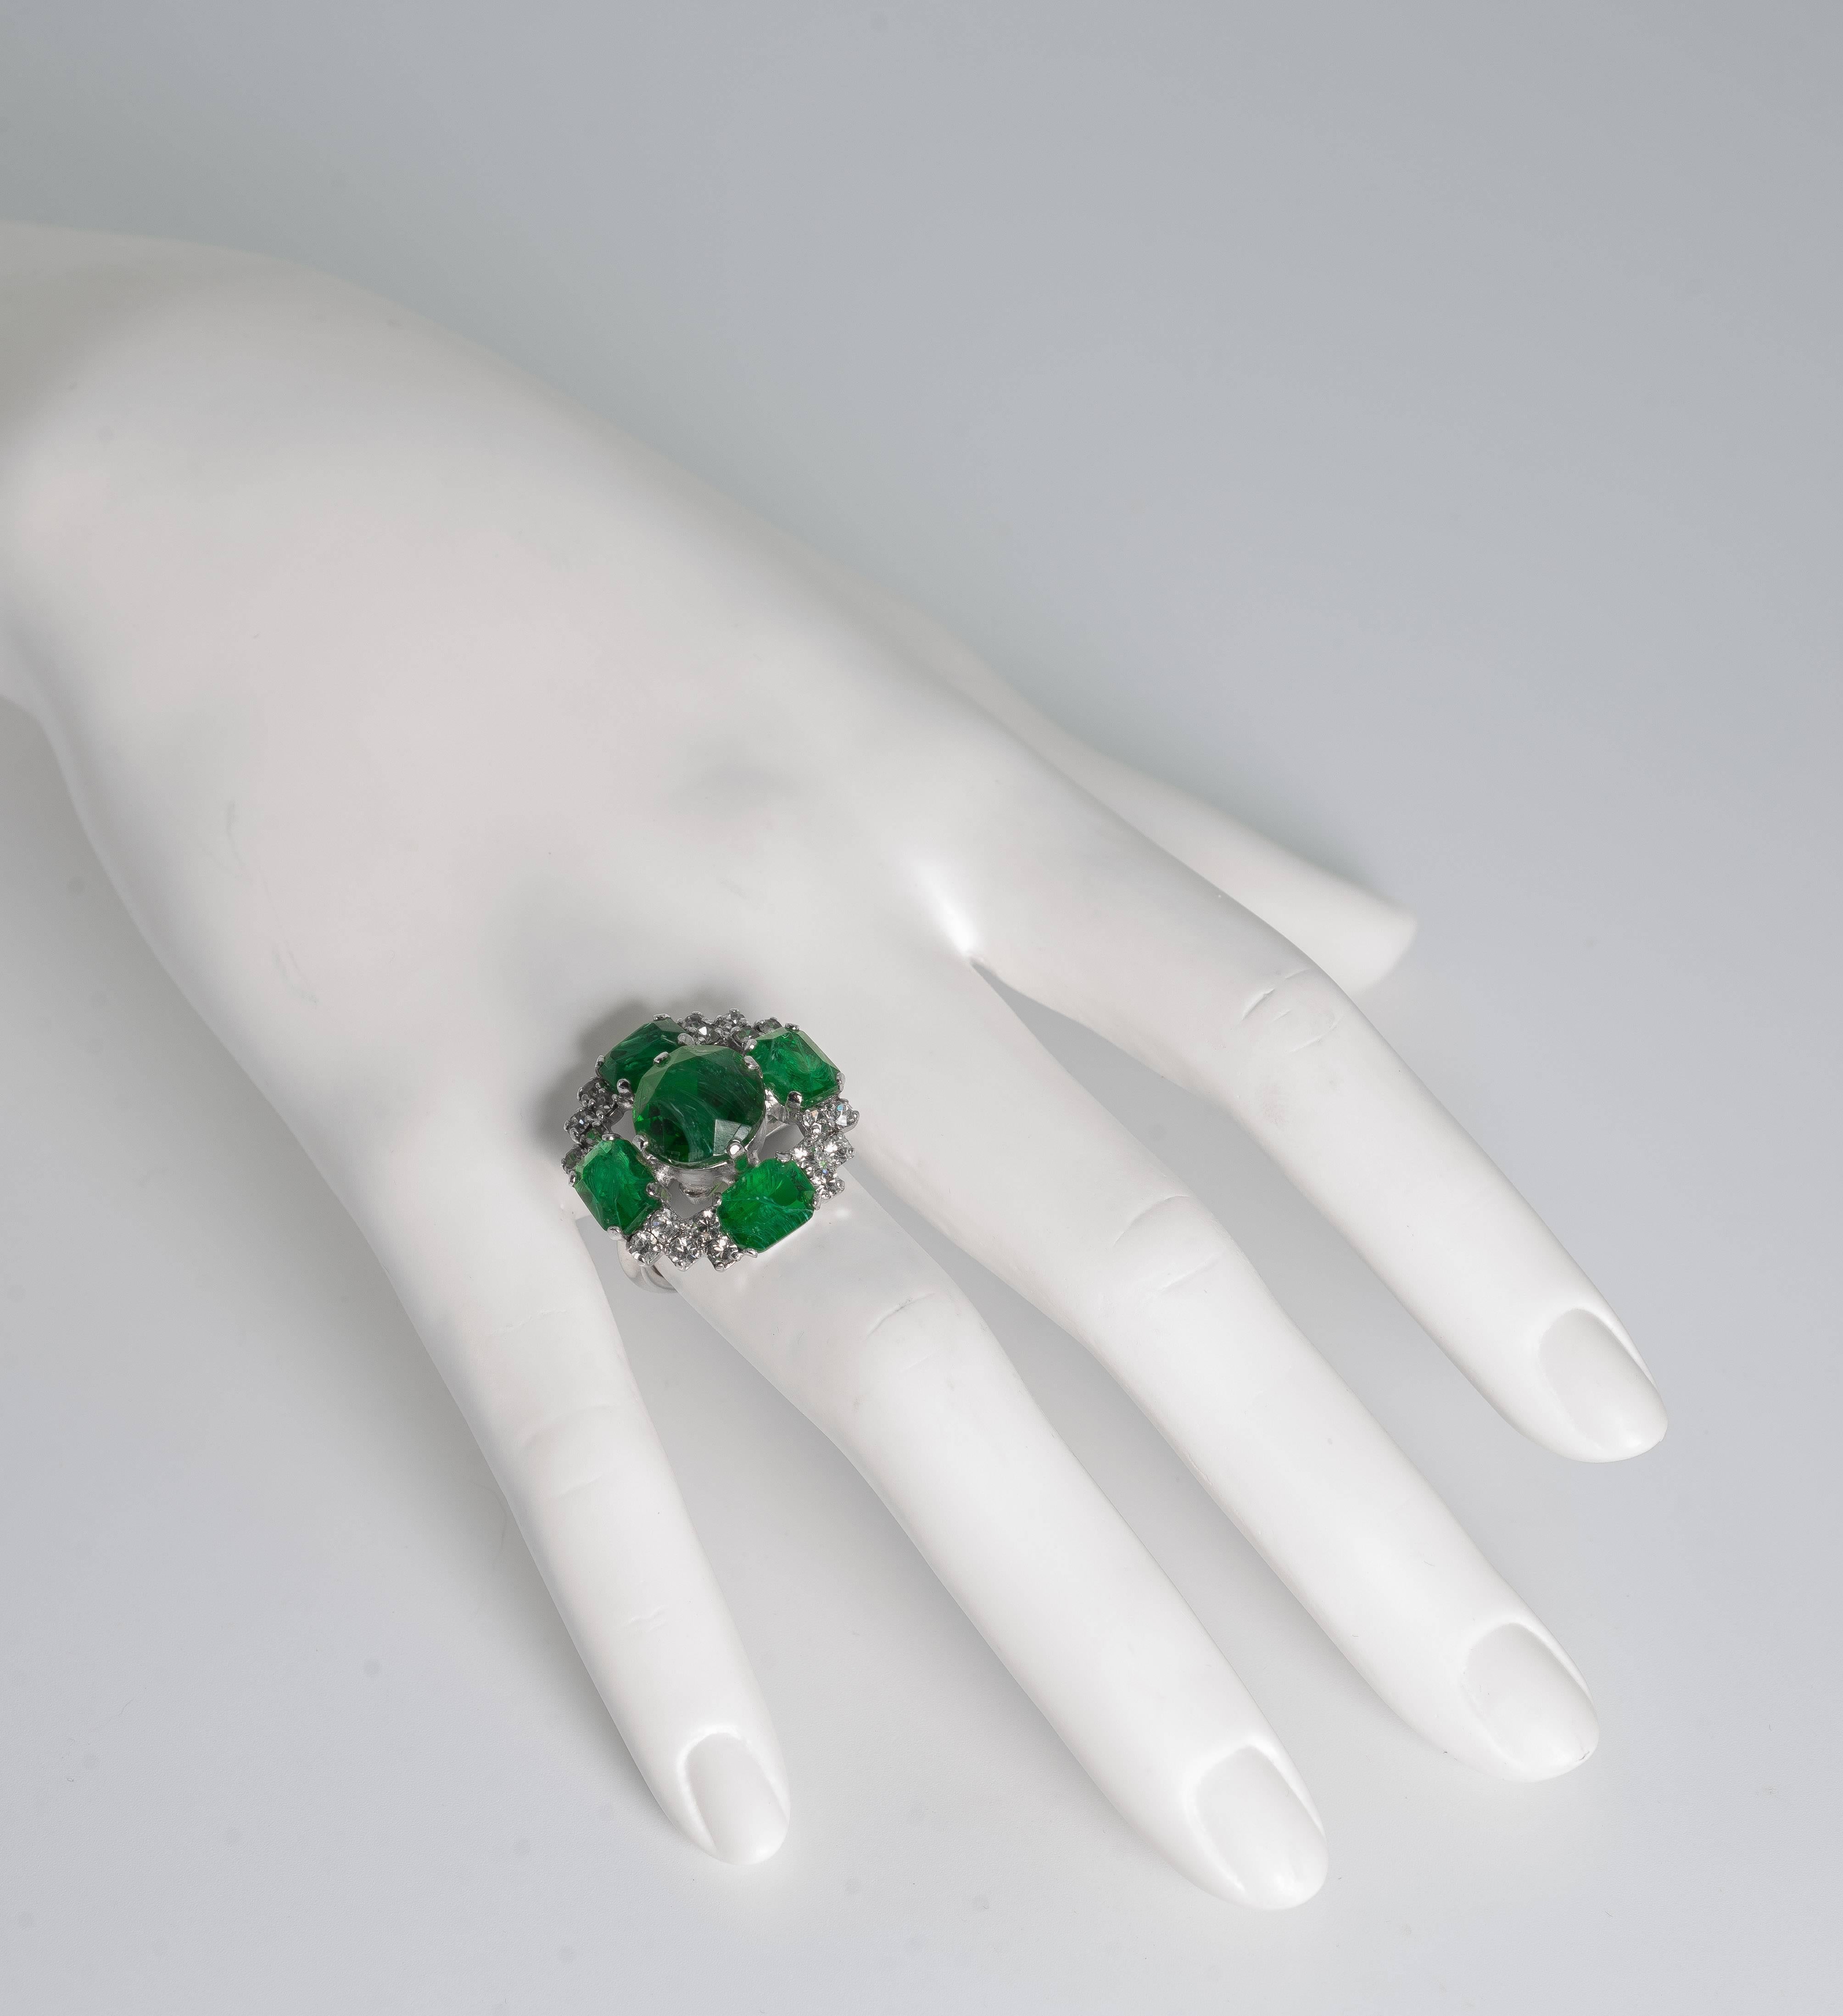 A 1960s Christian Dior faux emerald diamond ring set with Dior's famous 'flawed
emeralds''. Christian Dior designed a very popular faux emerald yet expensive collection in the 1960s. The original cost in 1968 was equivalent to-day $400.

Ring